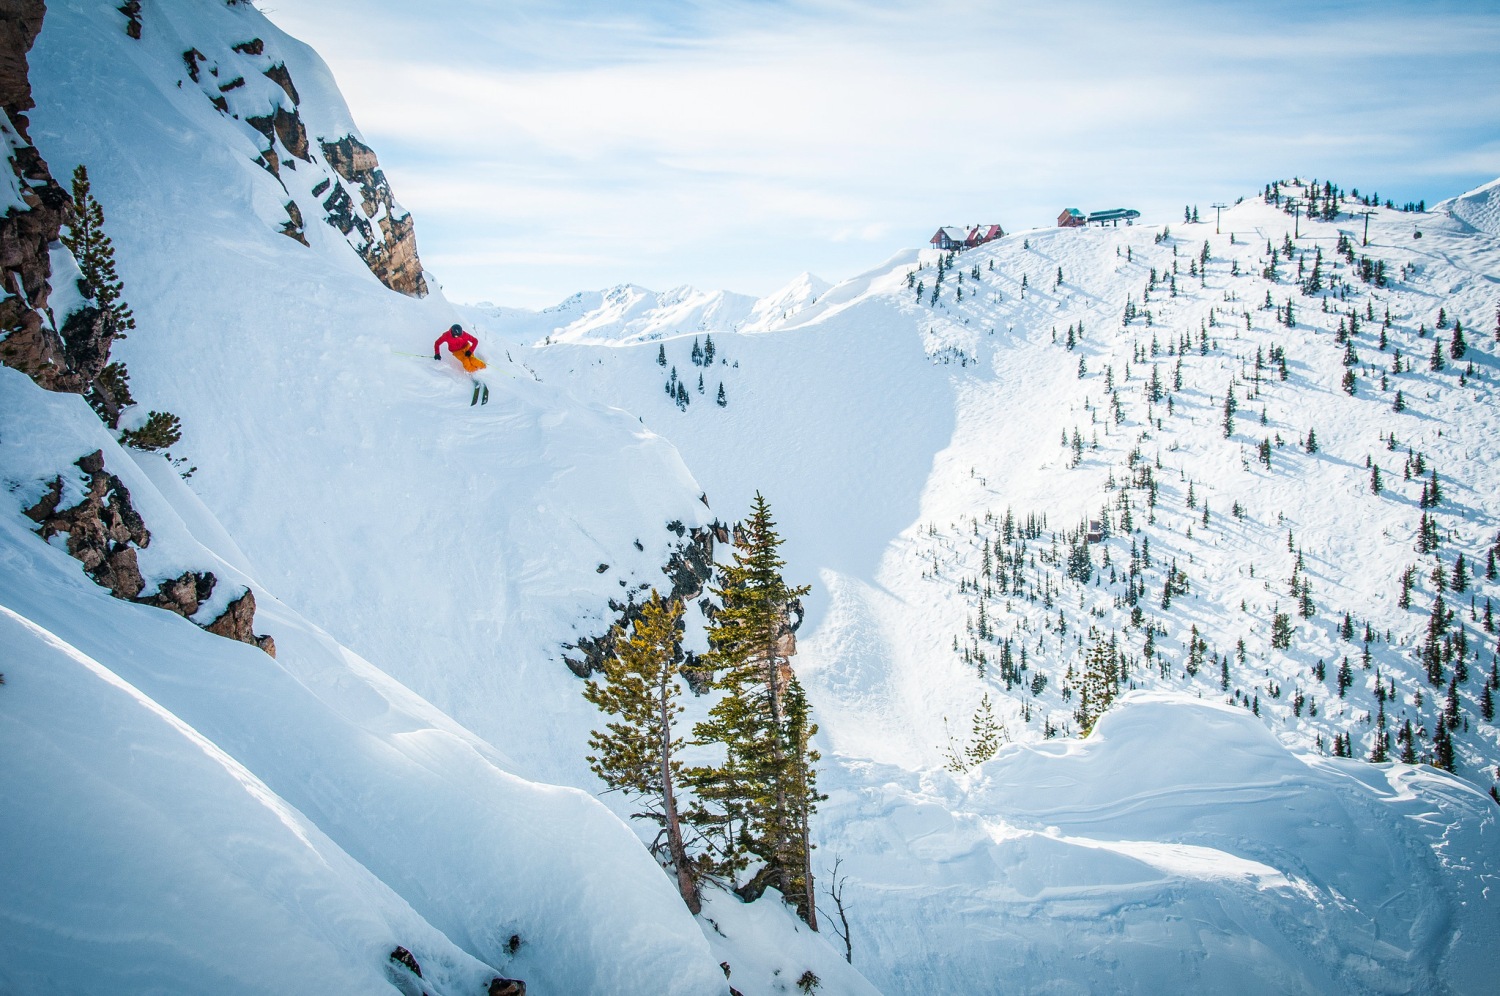 7 Reasons Skiing the Swiss Alps Is Better Than the Rockies - Men's